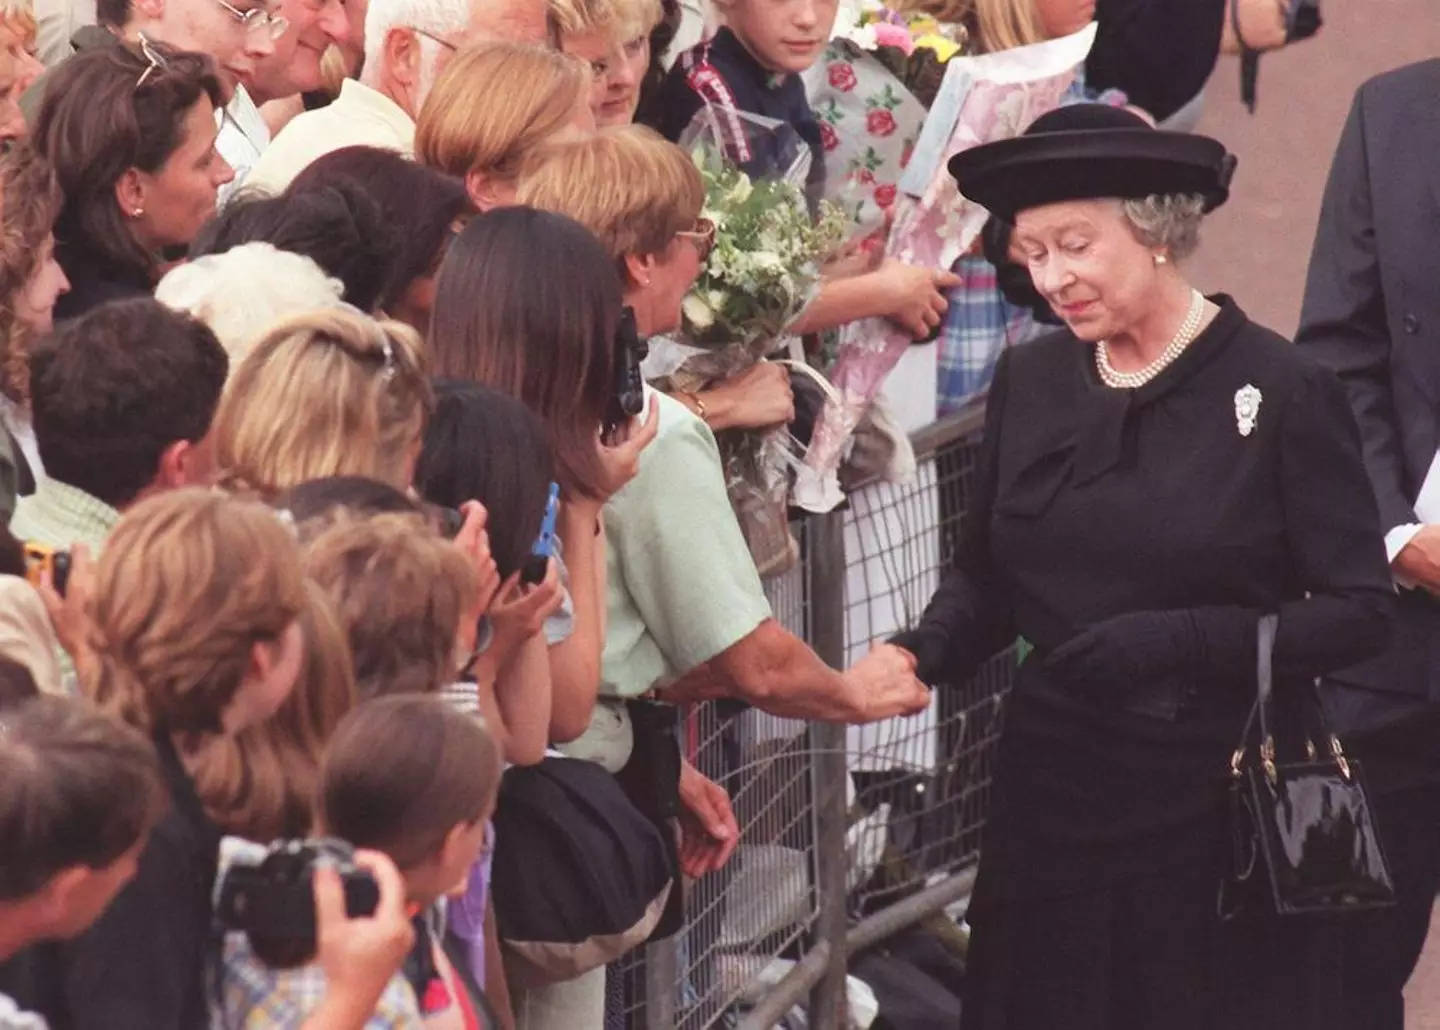 People were angry with the Queen for her reaction to Princess Diana's death.